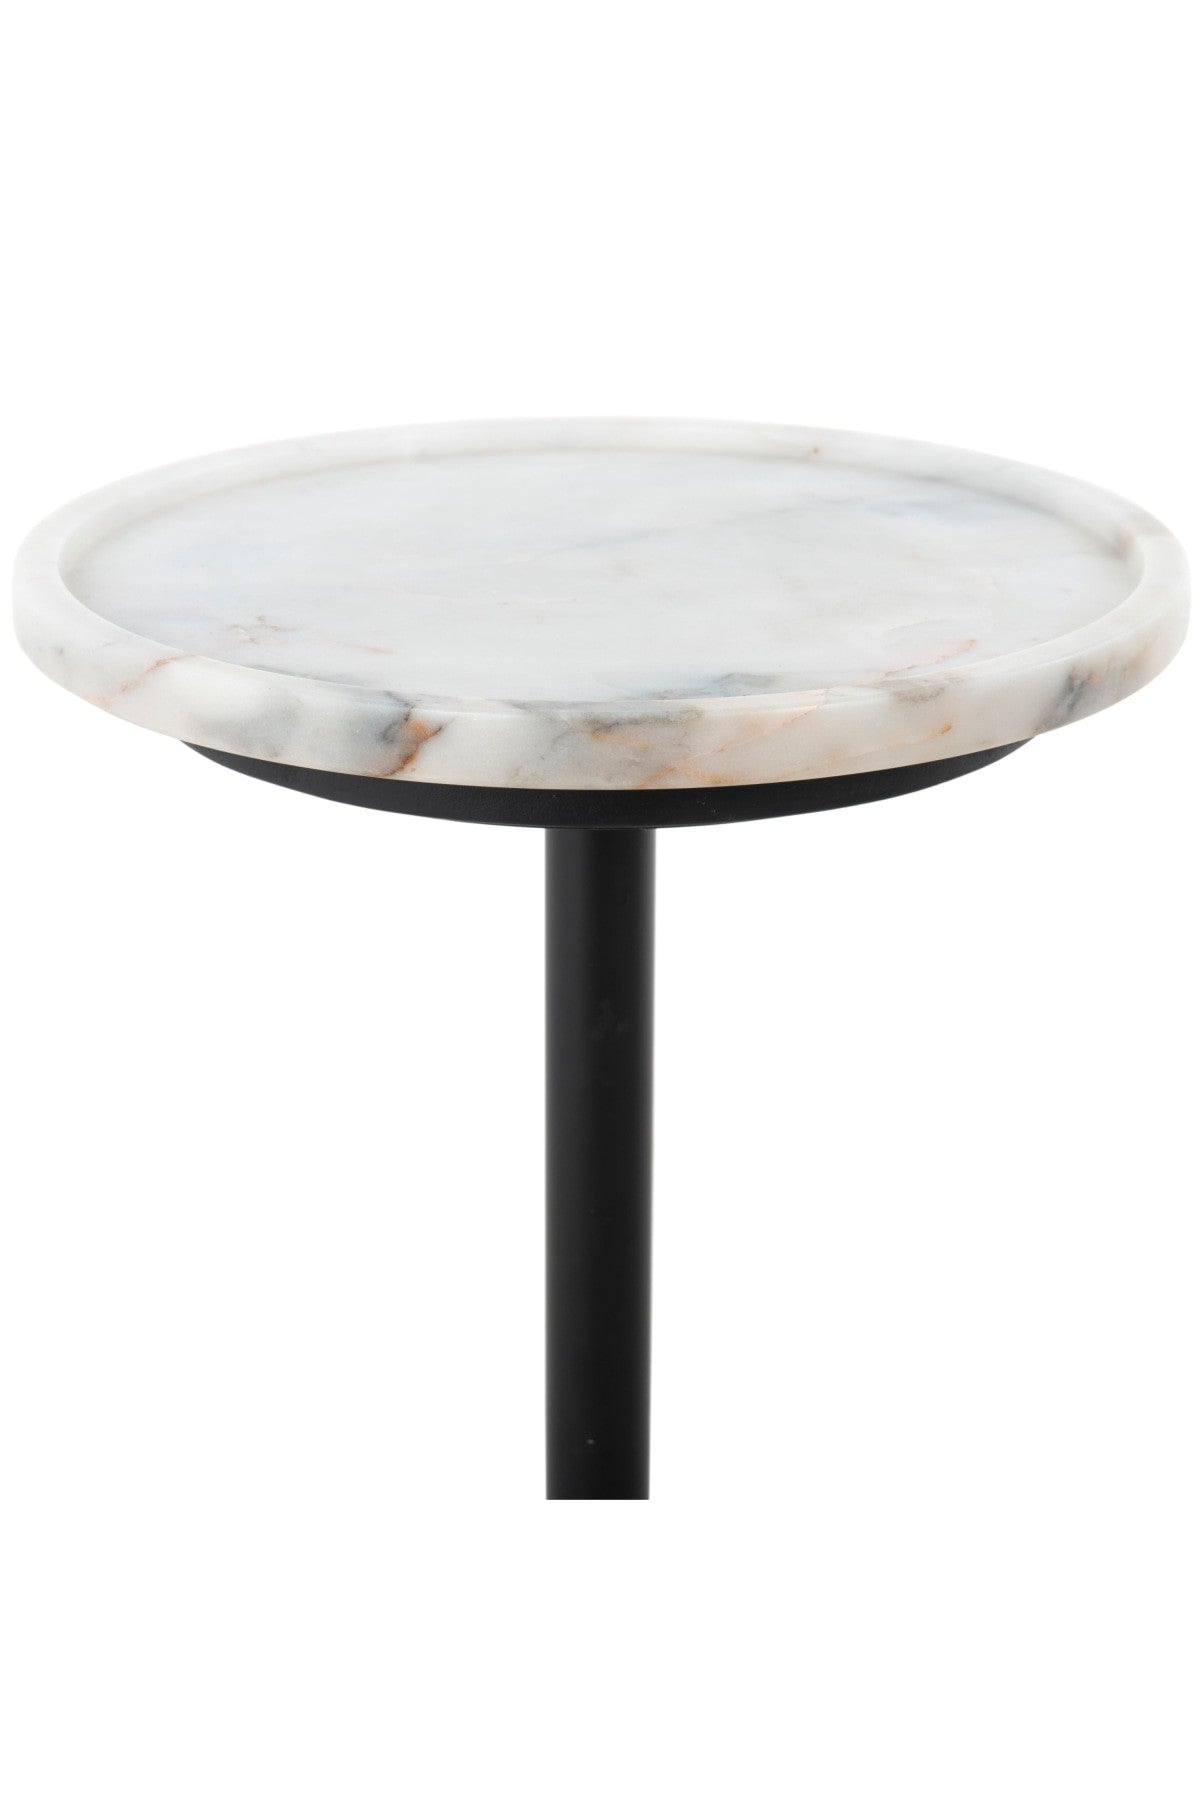 Frenly Accent Table - Polished White Marble